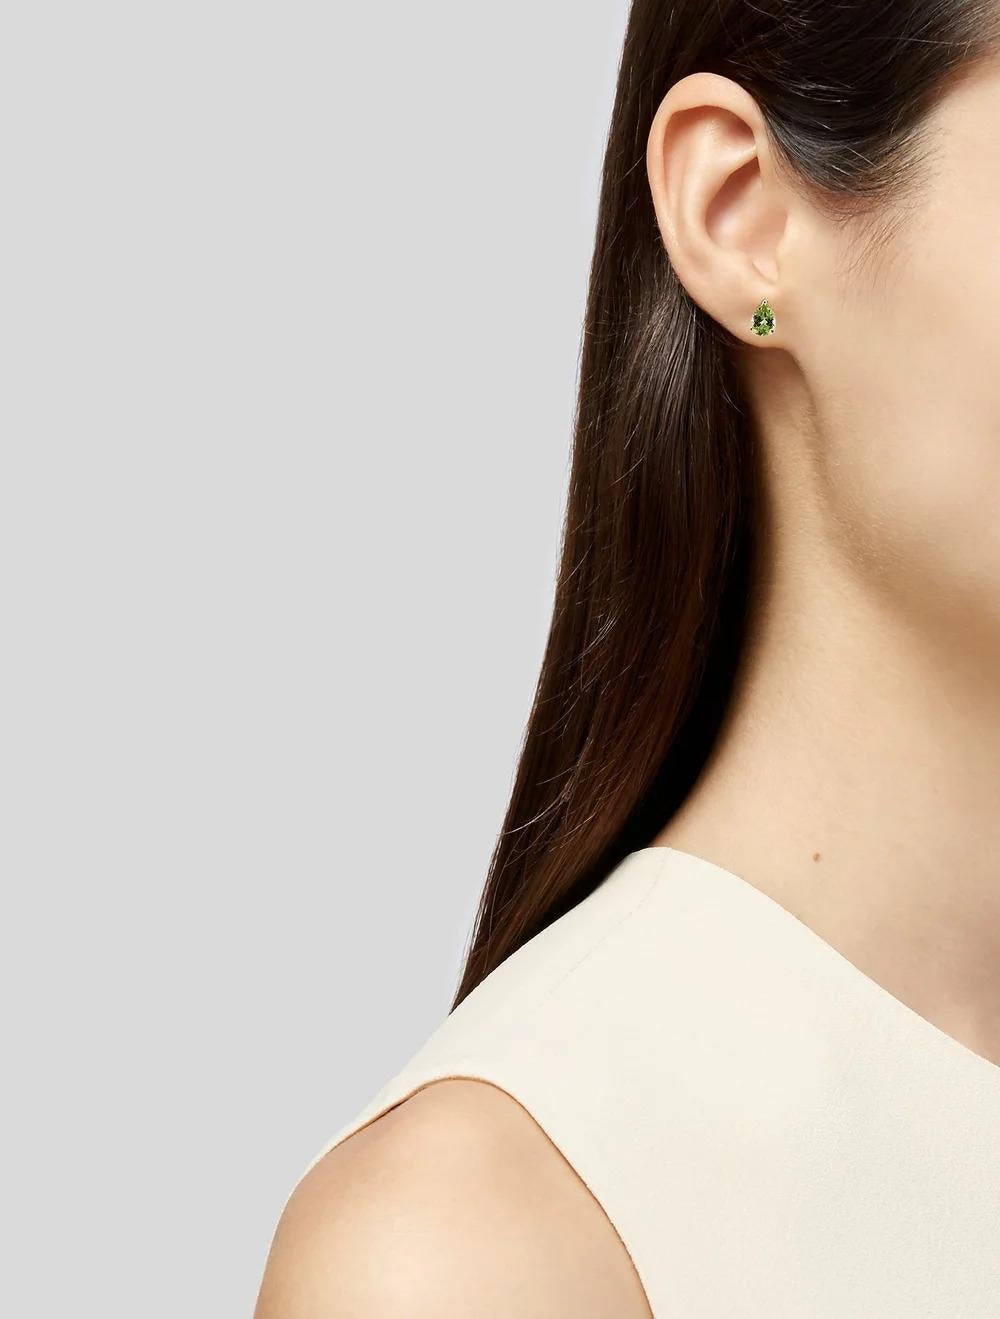 Illuminate your look with these stunning 14K Yellow Gold Peridot Stud Earrings, boasting a dazzling 2.51 Carat Pear Modified Brilliant gemstone. Crafted to perfection, these earrings exude elegance and charm, perfect for adding a touch of